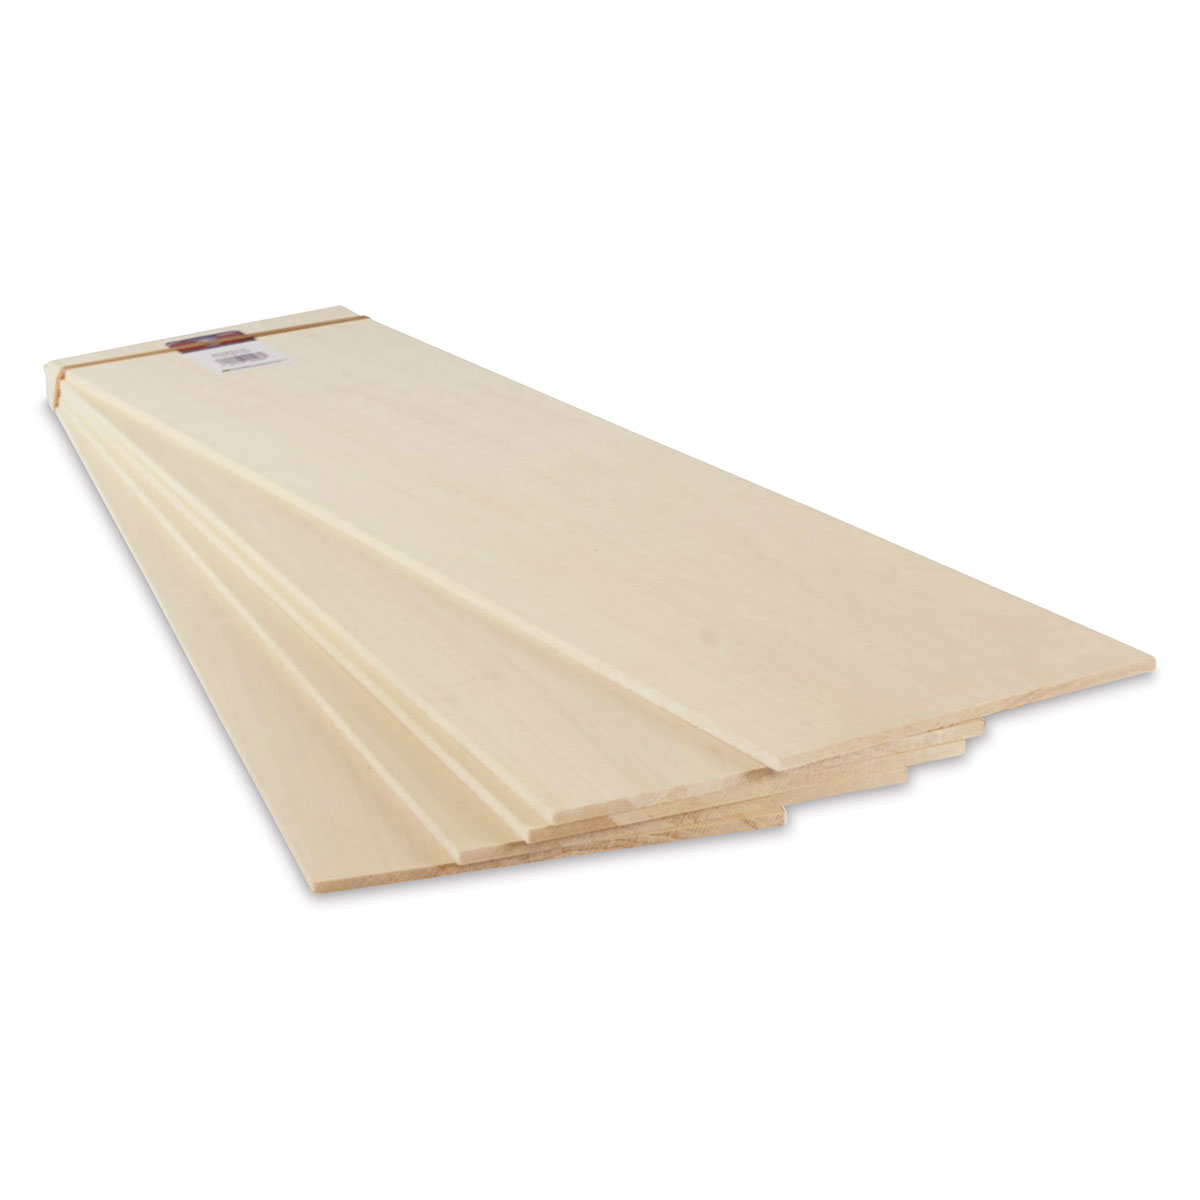 Midwest Basswood Sheets 1/4x4x24 (5) Hobby and Craft Basswood Sheets #4406